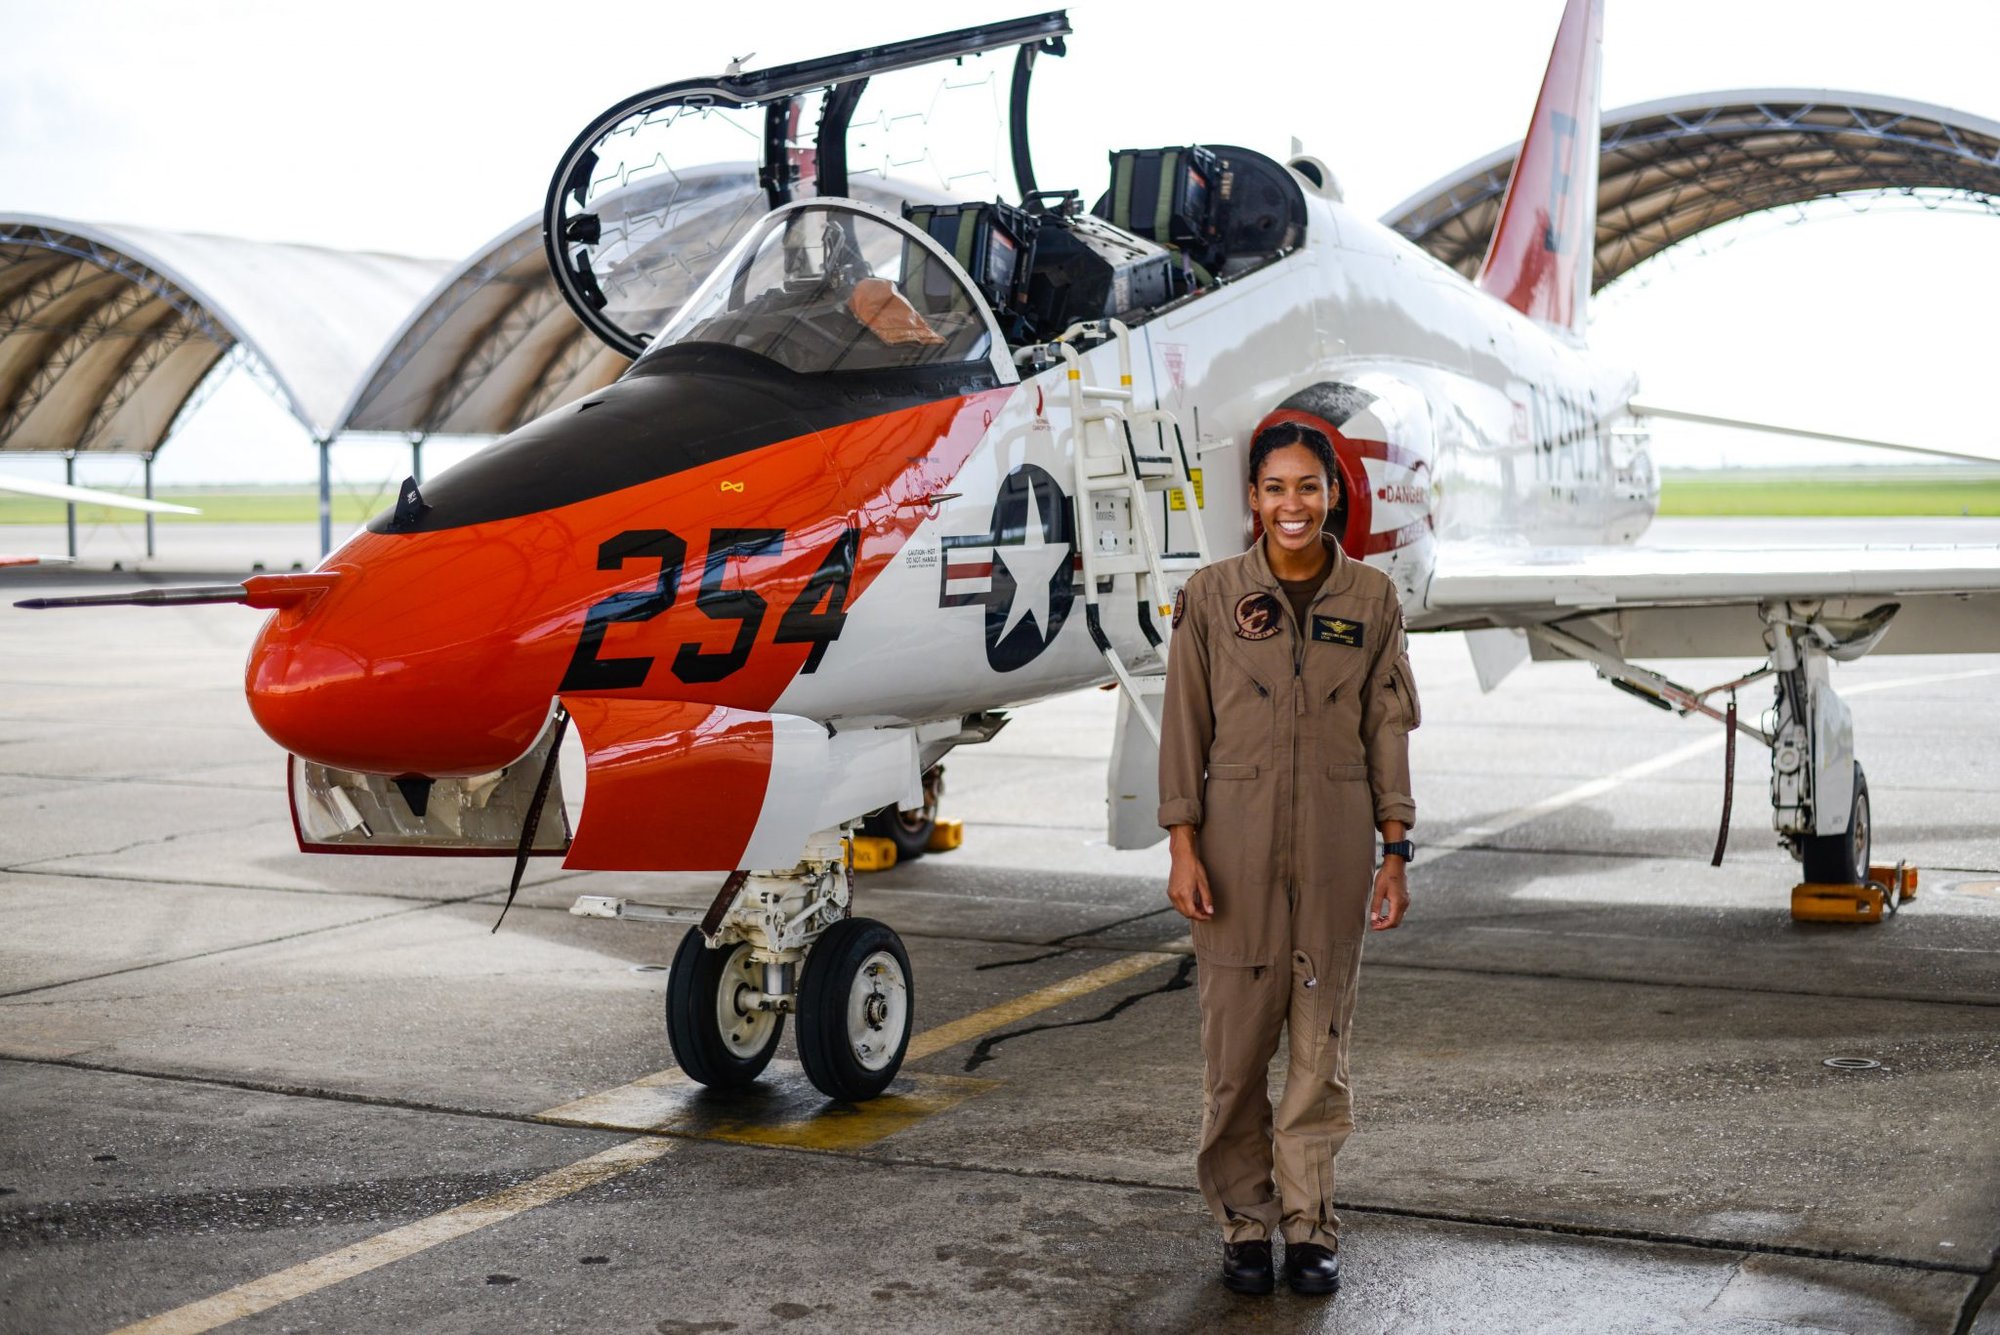 KINGSVILLE, Texas (July 7, 2020) Student Naval Aviator Lt. j.g. Madeline Swegle, assigned to the Redhawks of Training Squadron (VT) 21 at Naval Air Station Kingsville, Texas, stands by a T-45C Goshawk training aircraft following her final flight to complete the undergraduate Tactical Air (Strike) pilot training syllabus, July 7, 2020. Swegle is the Navy's first known Black female strike aviator and will receive her Wings of Gold during a ceremony July 31. (U.S. Navy photo by Lt.j.g. Luke Redito/Released)